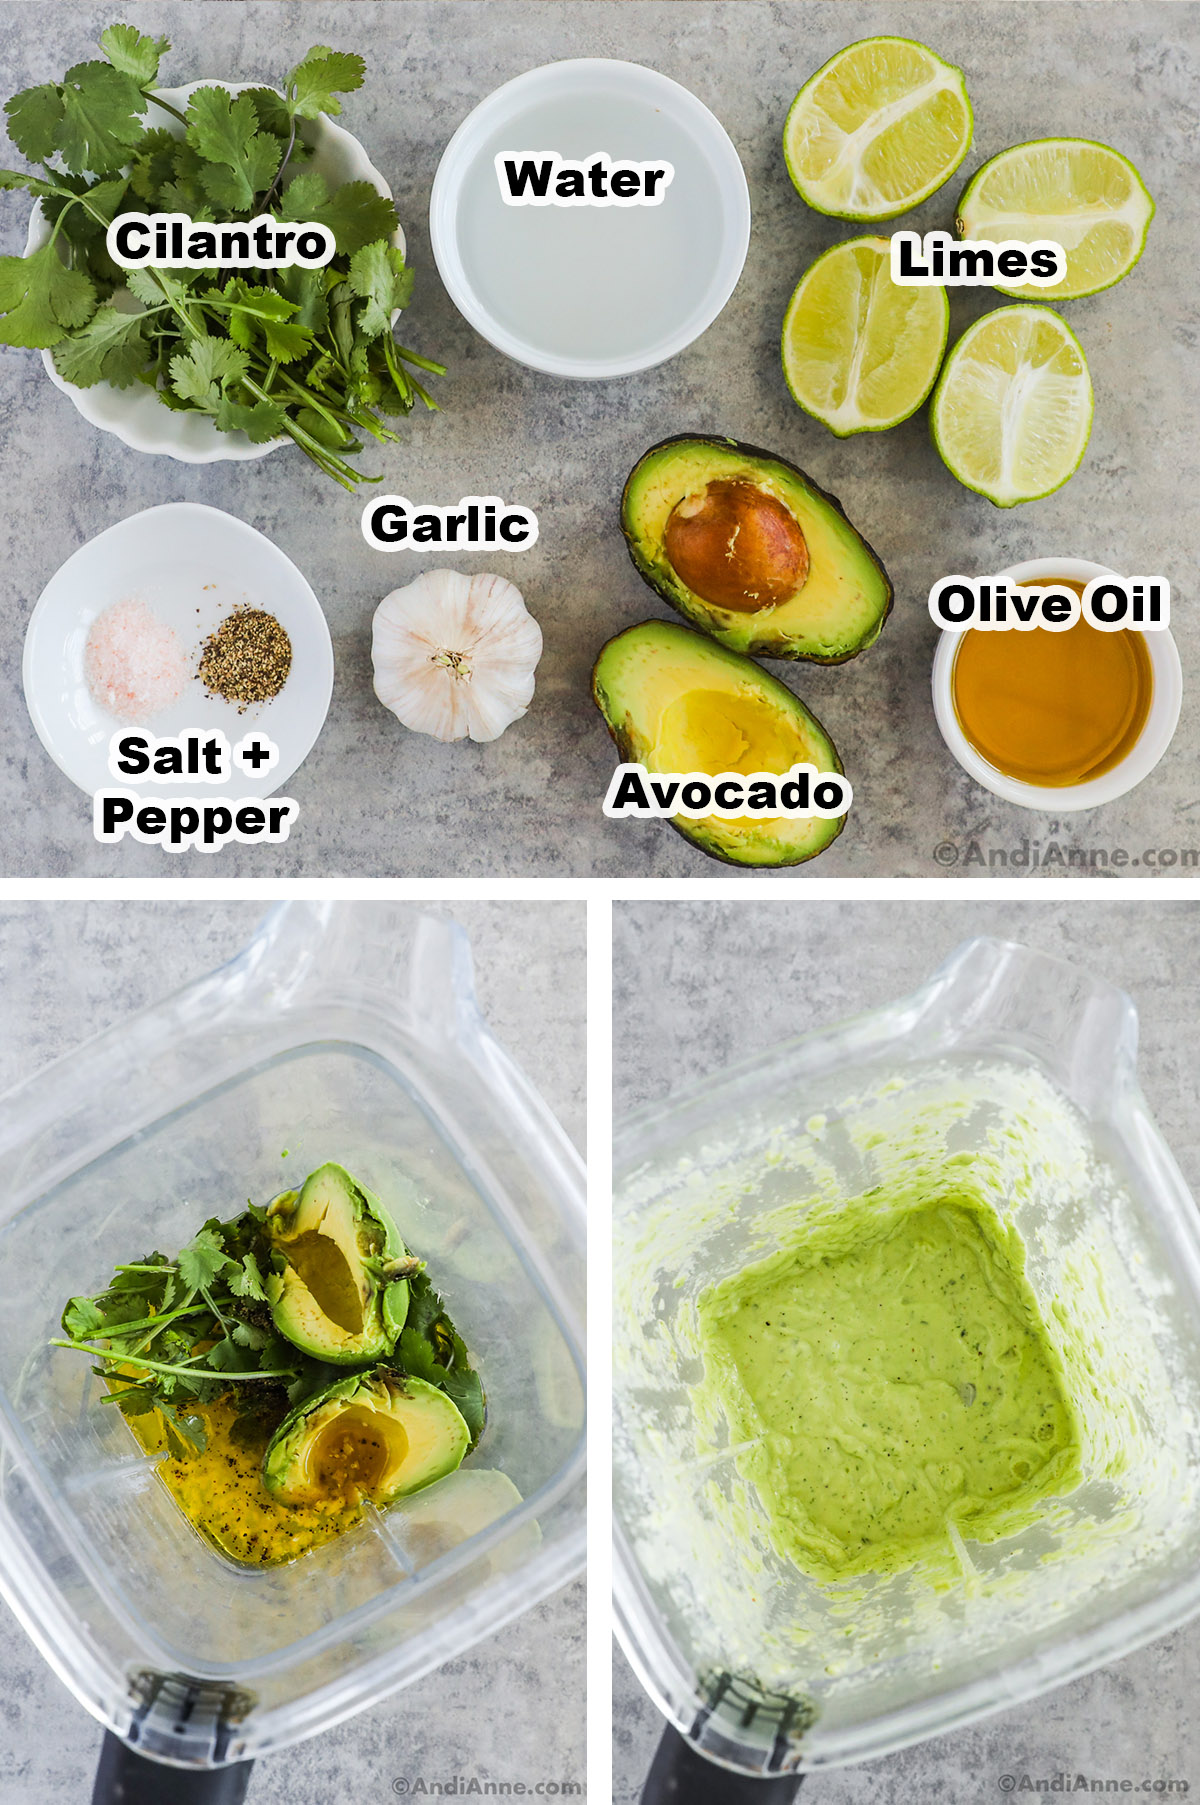 Three images, first is ingredients including fresh cilantro, jar of water, sliced limes, sliced avocado, garlic bulb, bowl of olive oil and salt and pepper. Last two are blender with ingredients dumped in, first unmixed then mixed.